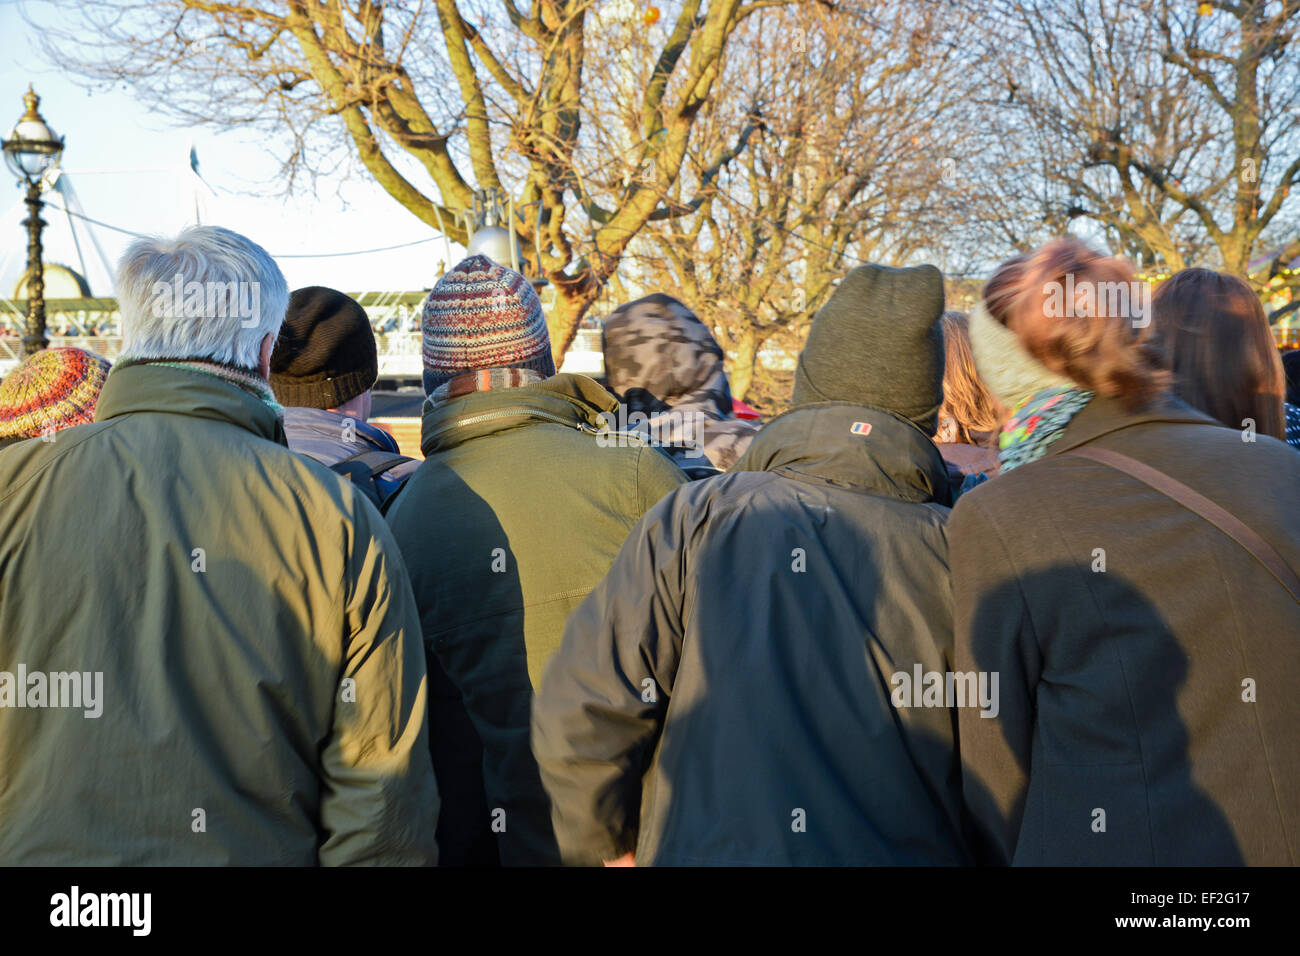 Rear view of People watching entertainers at the embankment London UK Stock Photo